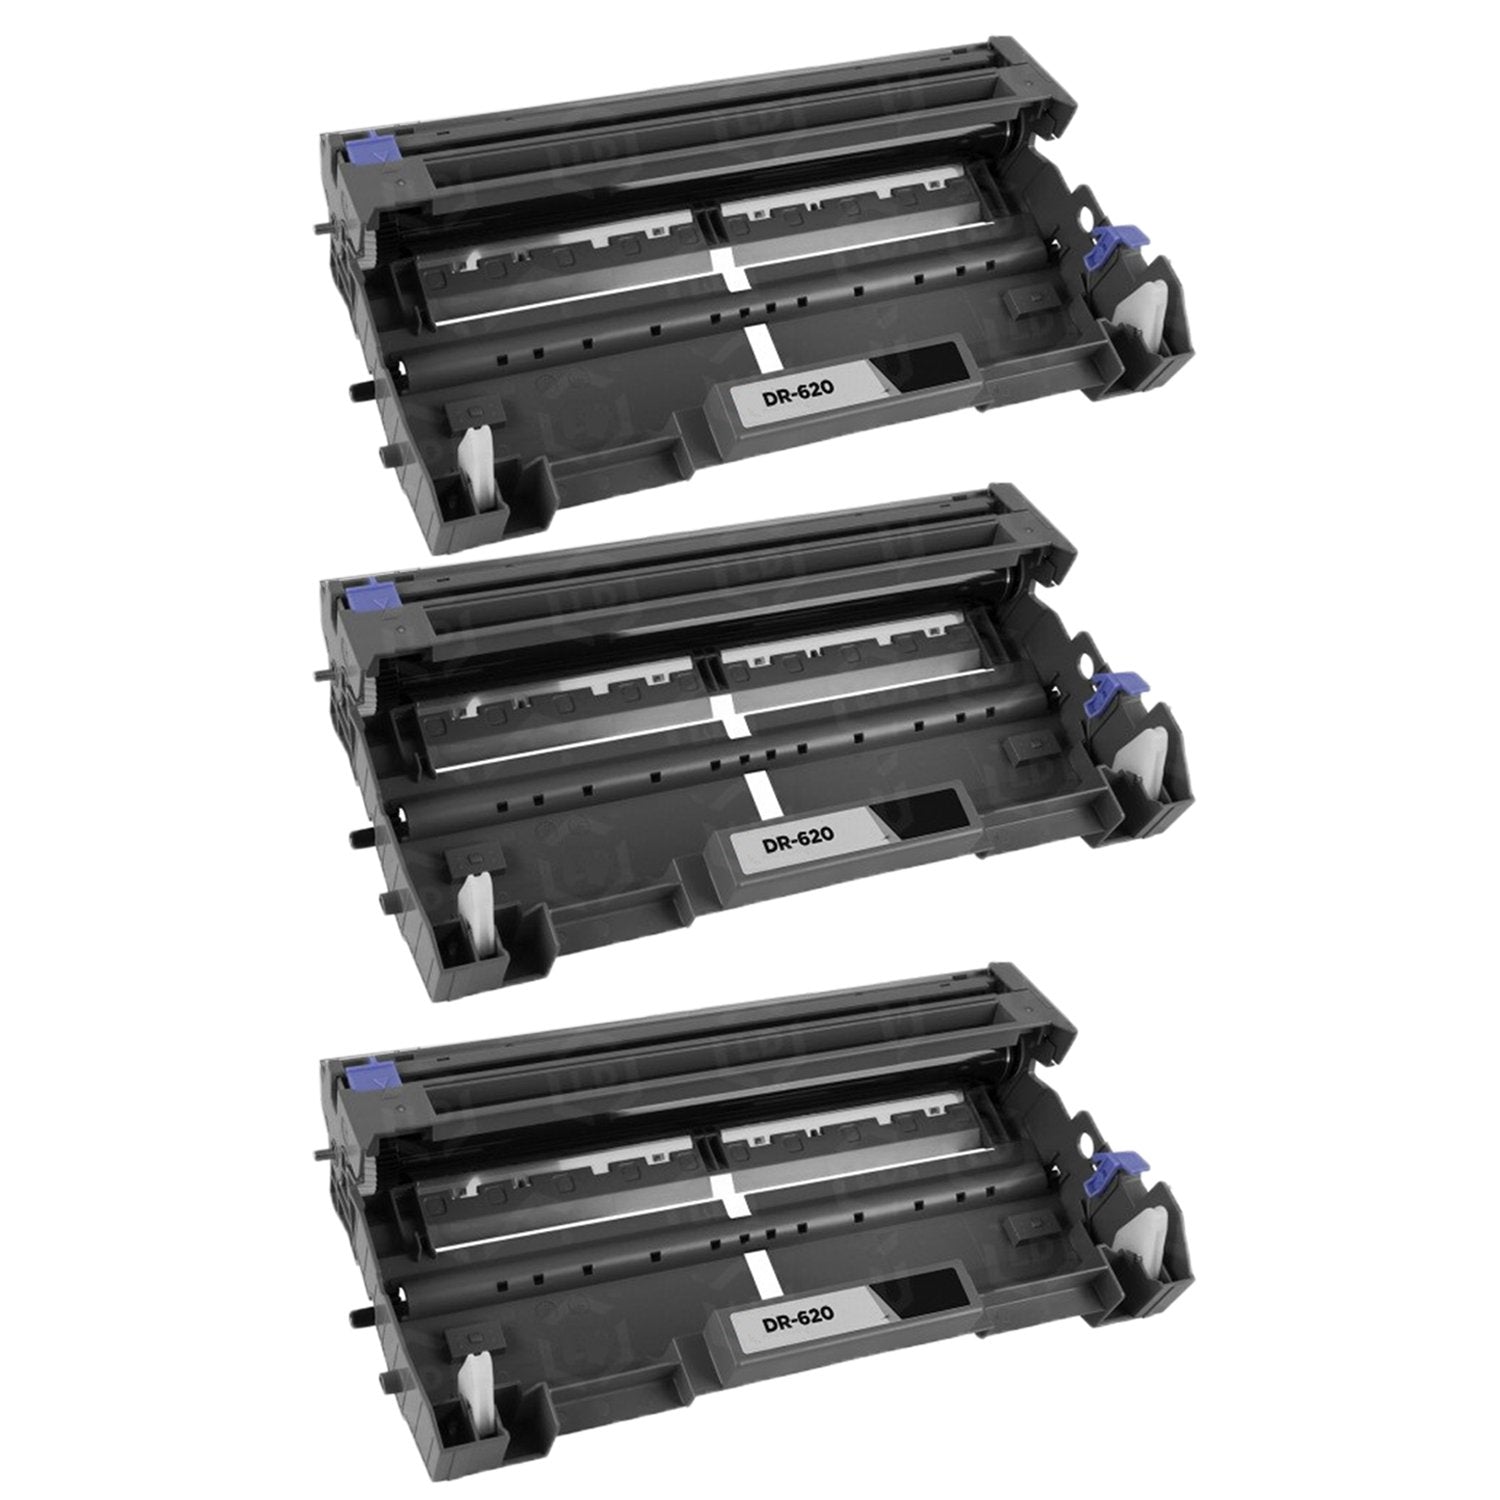 Absolute Toner Compatible Brother DR620 Black Drum Unit Toner Cartridge | Absolute Toner Brother Toner Cartridges